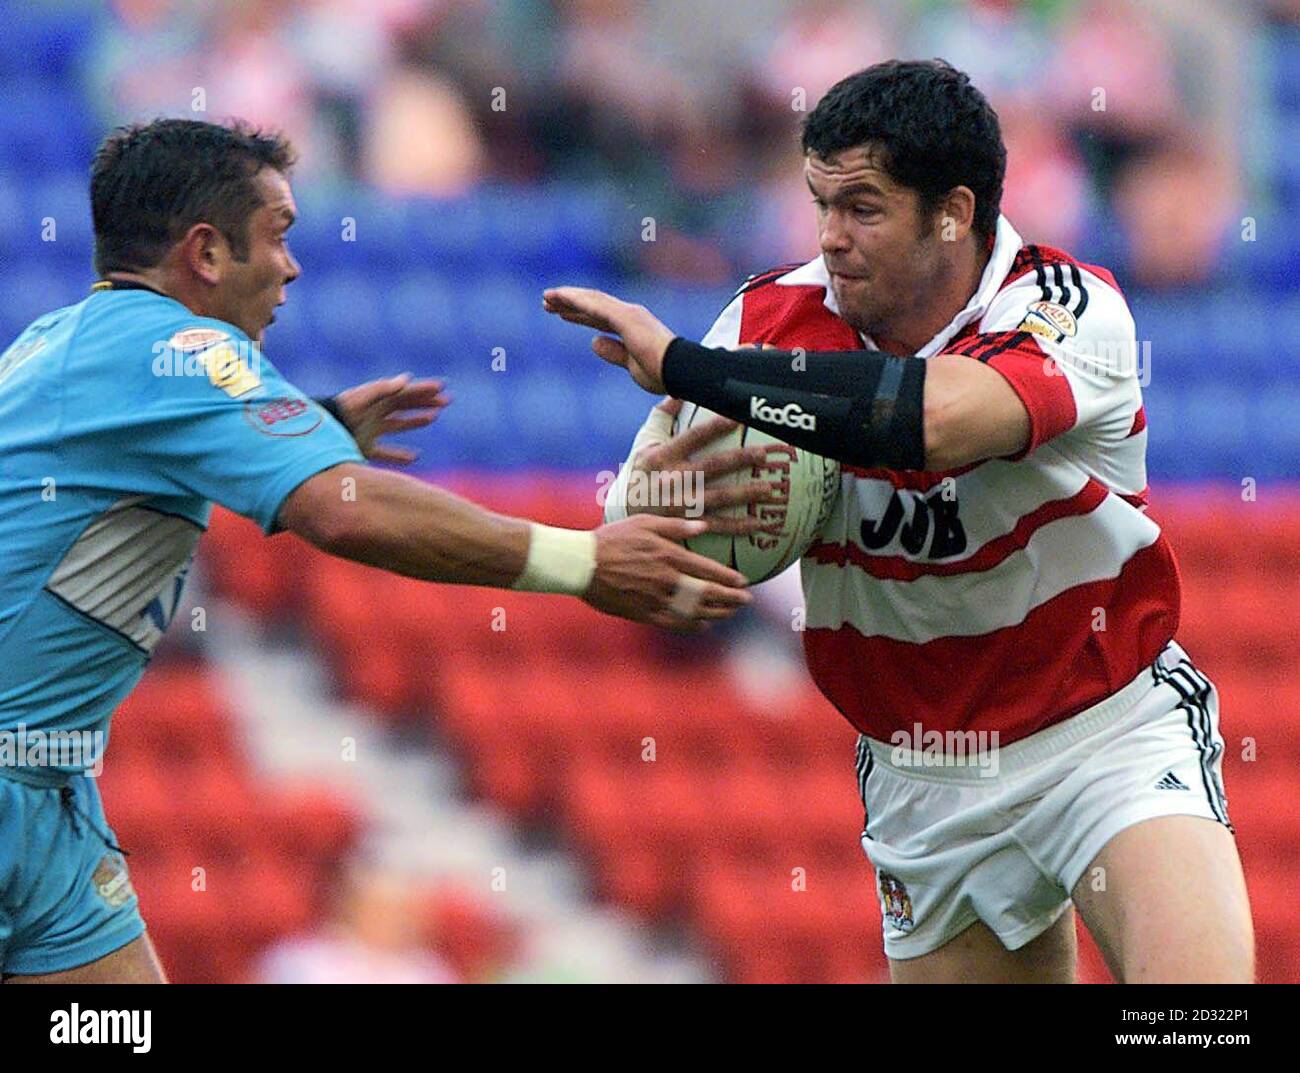 Wigan Warrior's Andy Farrell (right) bursts past the Hull Shark's defence during the Tetley's Bitter Super League game at the JJB Stadium, Wigan. Stock Photo